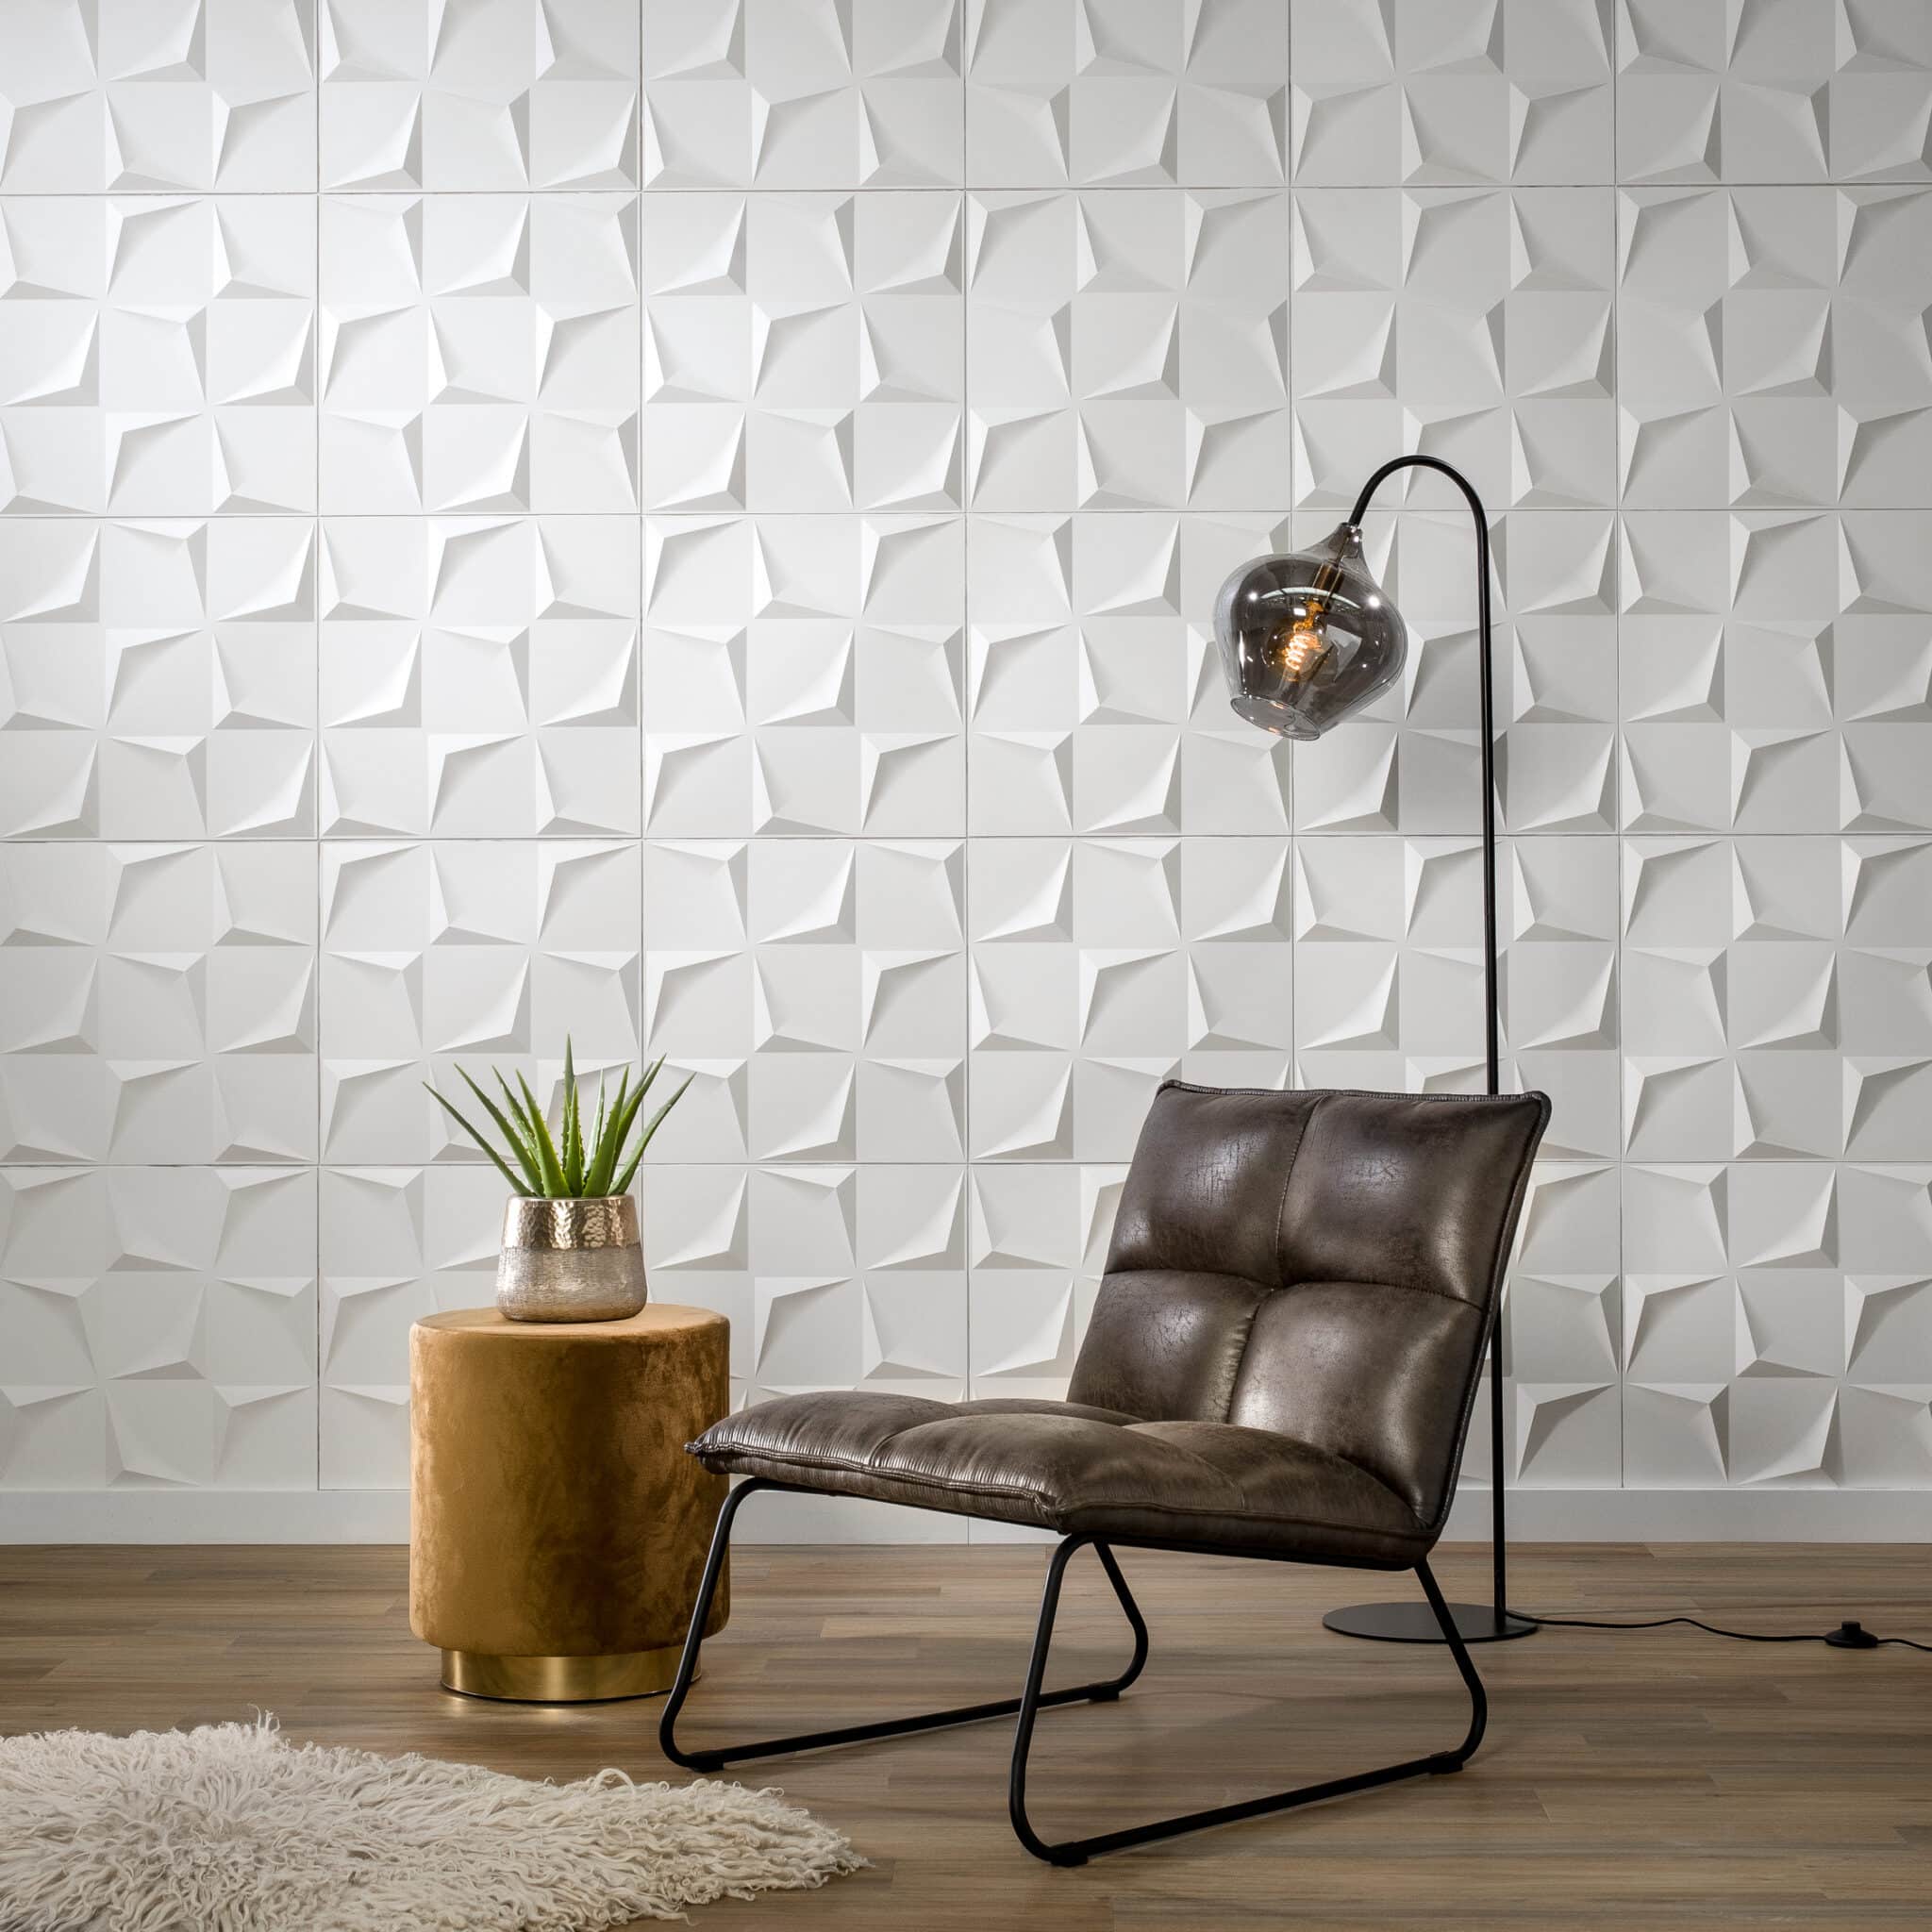 Wall Paneling for Interior - Textured Wall Panels BEAU Design